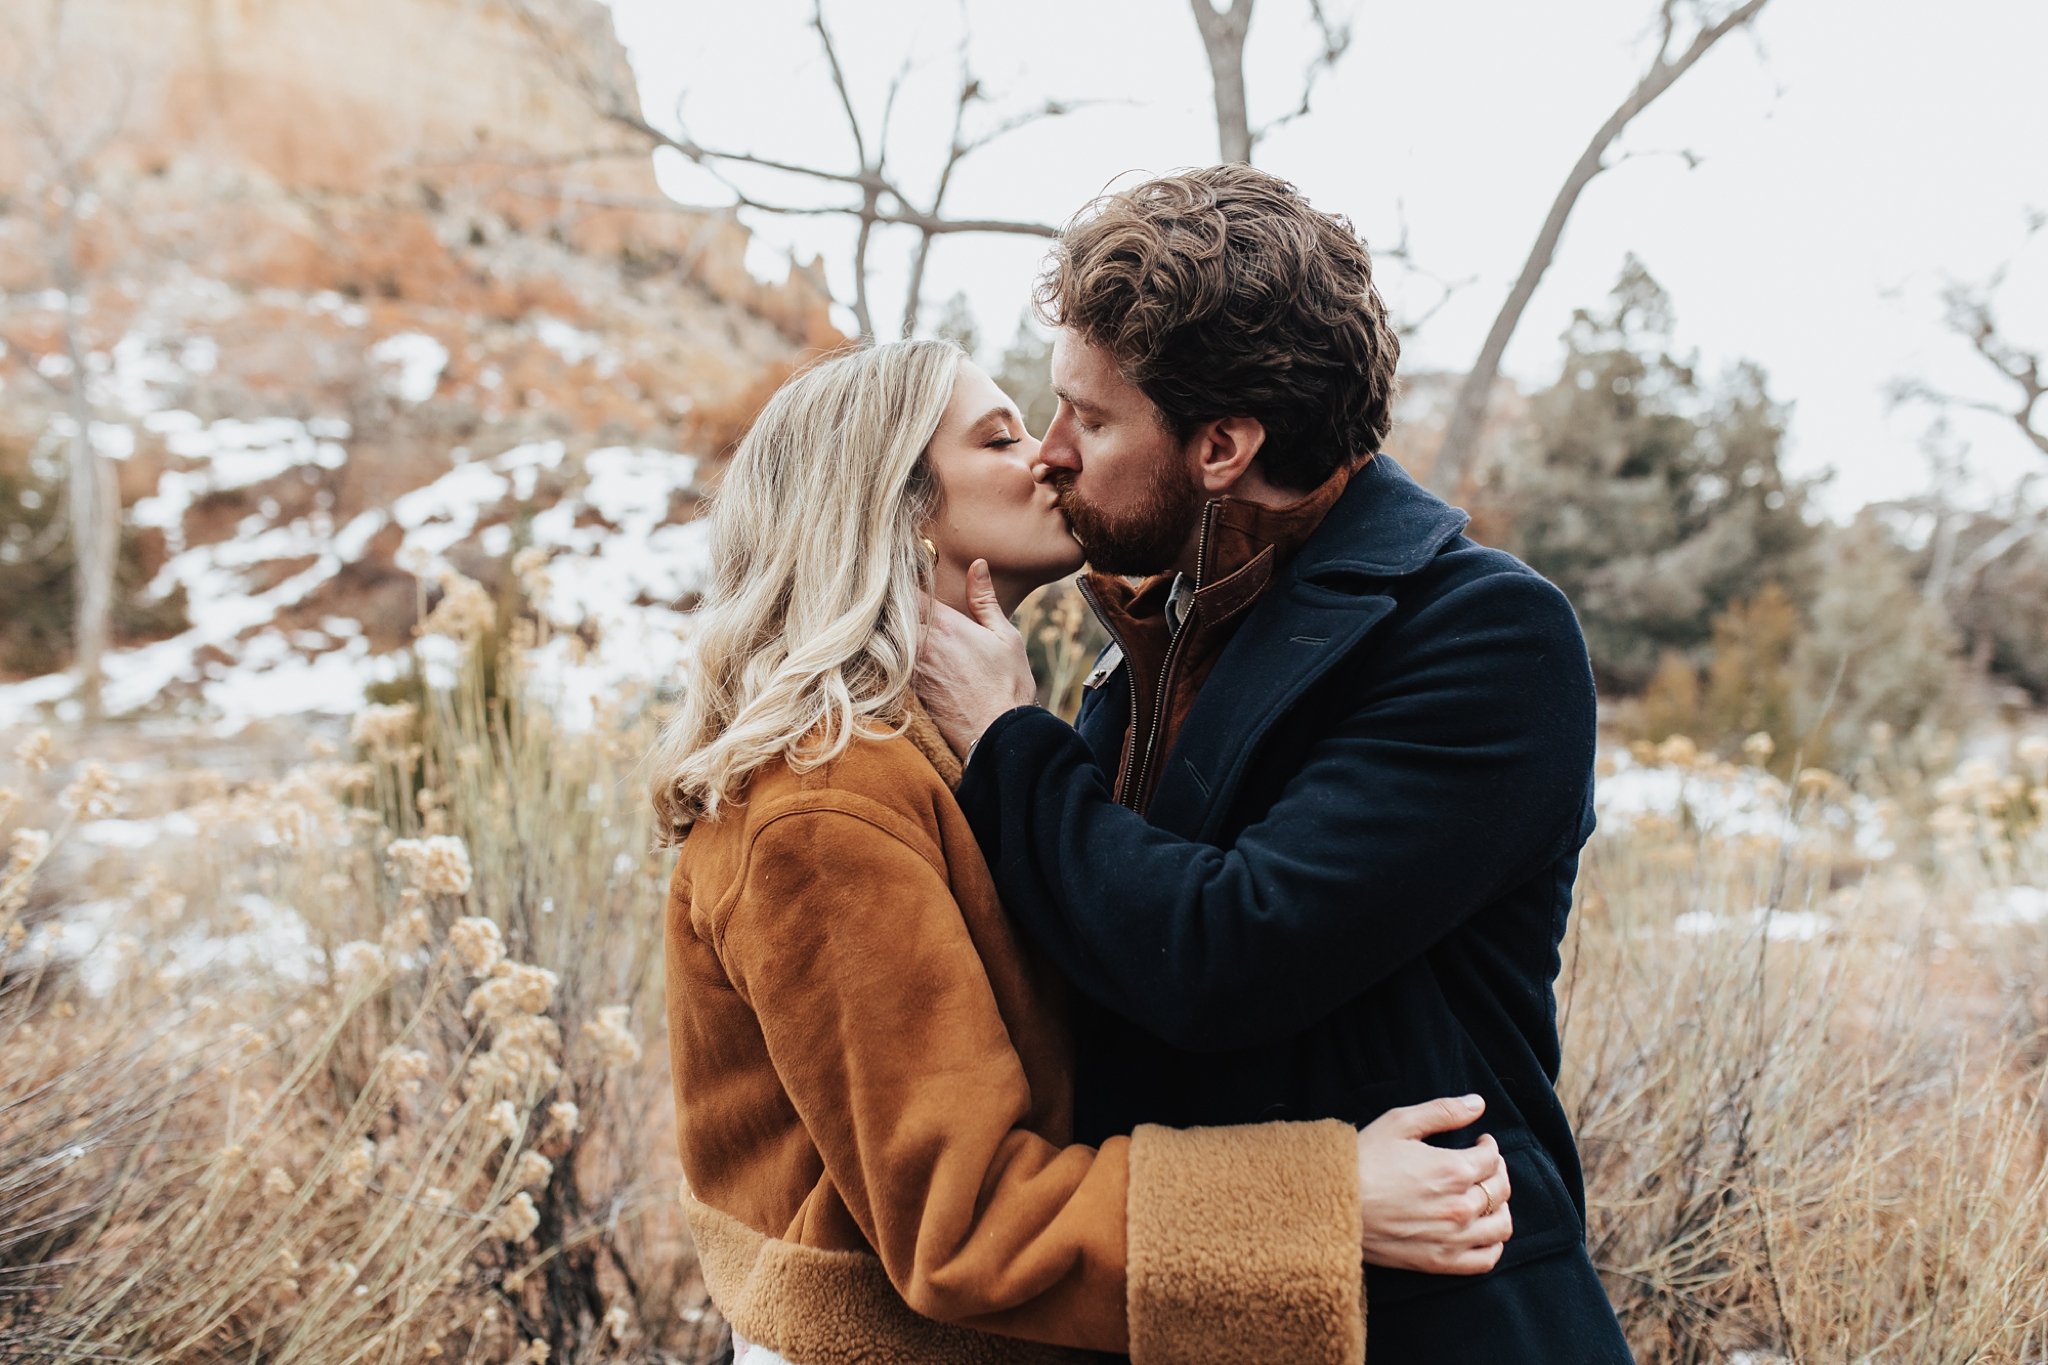 Alicia+lucia+photography+-+albuquerque+wedding+photographer+-+santa+fe+wedding+photography+-+new+mexico+wedding+photographer+-+new+mexico+wedding+-+southwest+engagement+-+ghost+ranch+engagement+-+ghost+ranch+wedding_0041.jpg